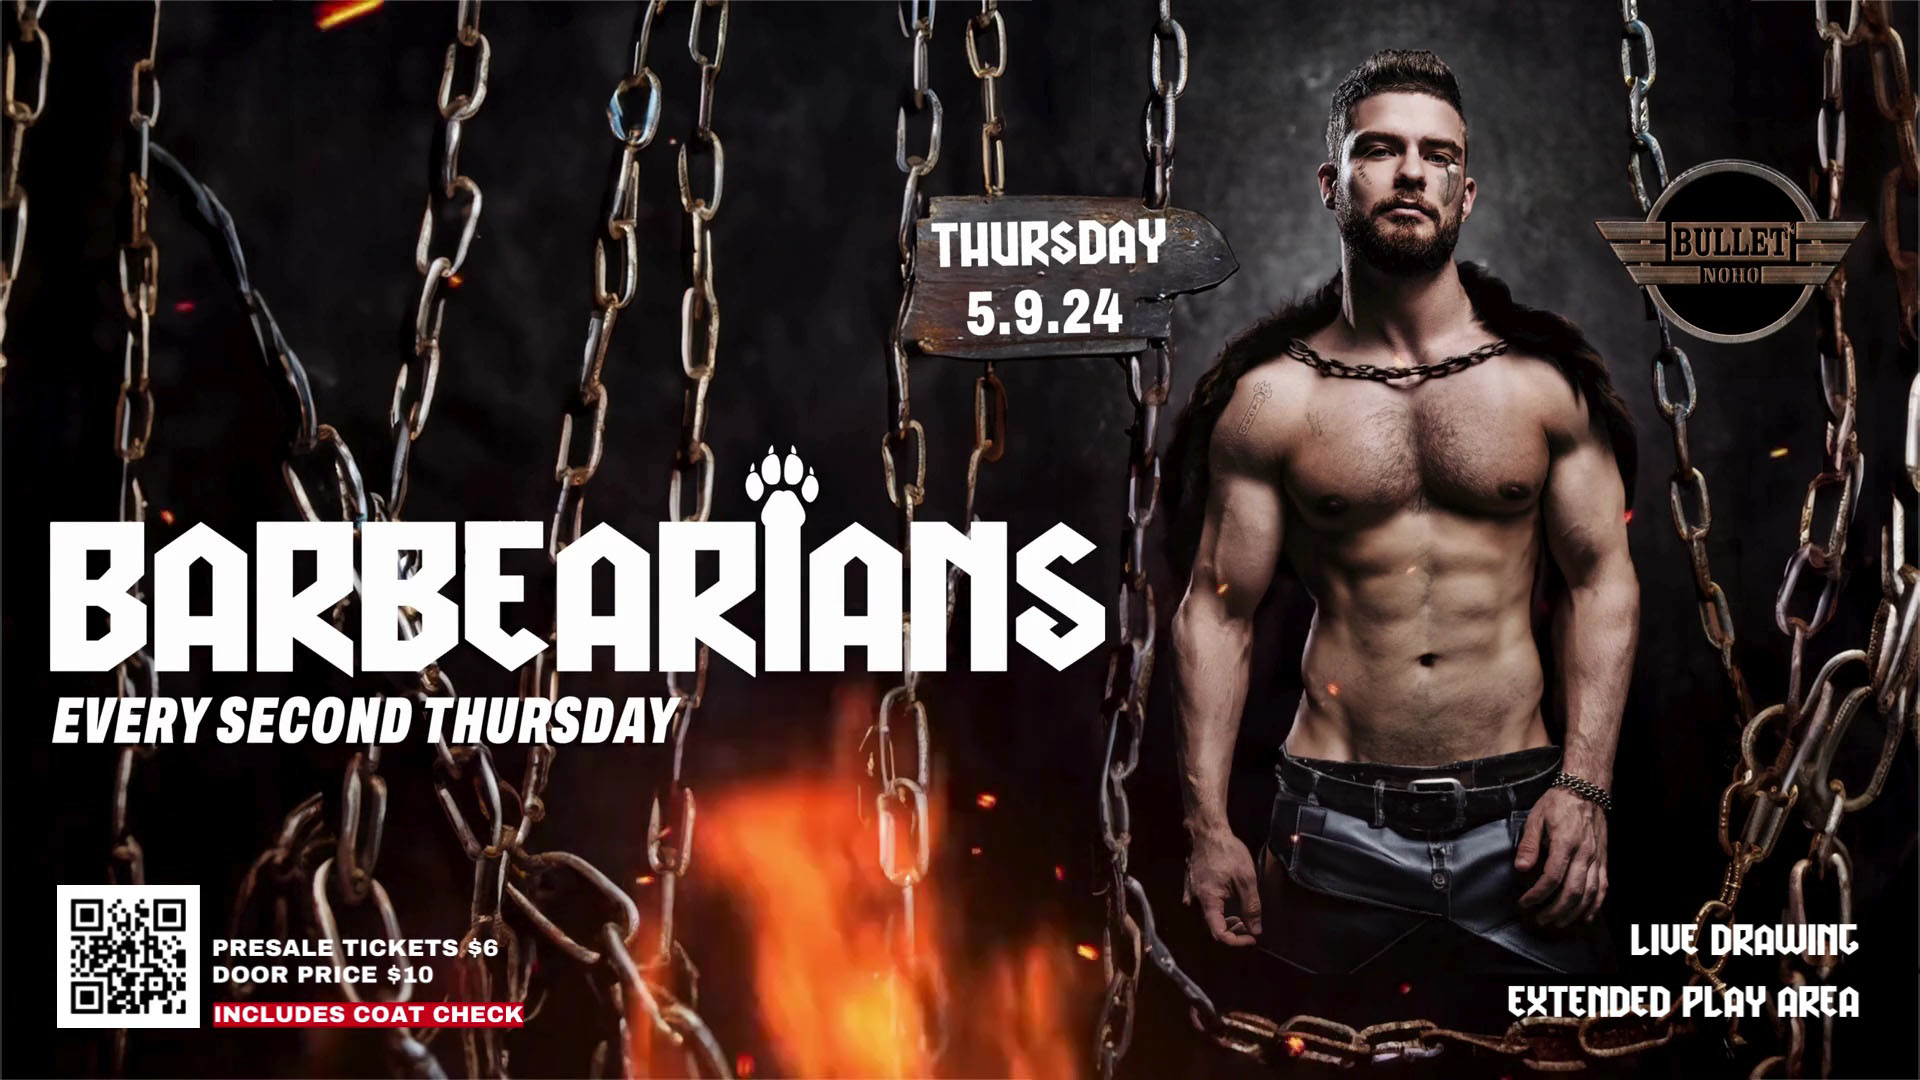 THE BULLET BAR Presents BARBEARIANS, A Bear & Leather Event: Thursday, 05/09/24 at 9:00 PM. Presale Tickets $6 and Door Cover $10. Presales: https://www.eventbrite.com/e/barbearians-the-bullet-noho-tickets-881619767457